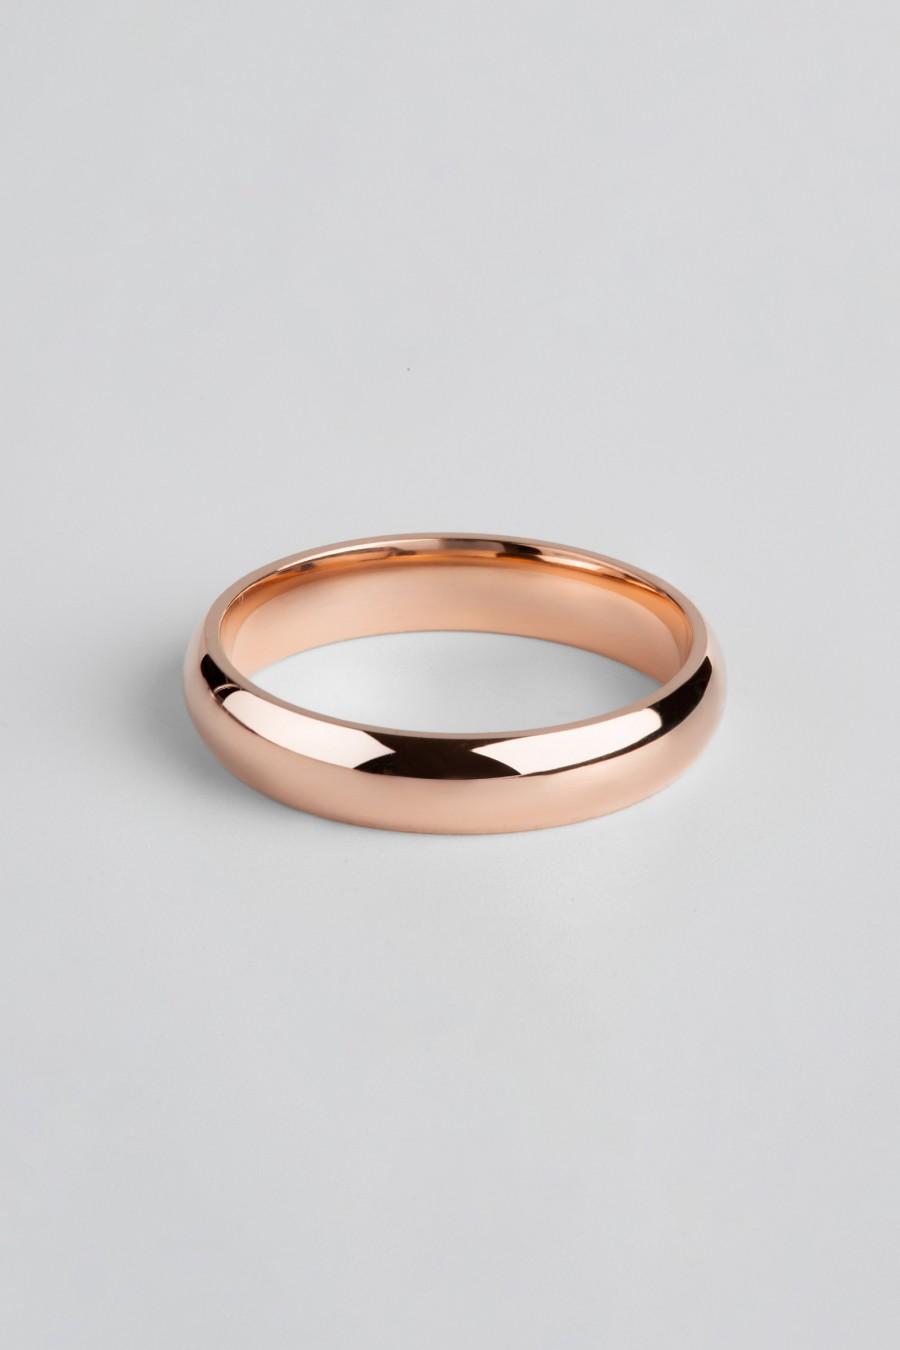 Hochzeit - 14k Rose Gold Band - CLASSIC DOME / Polished / Comfort Fit / Men's Women's Wedding Ring / Simple Wedding Ring